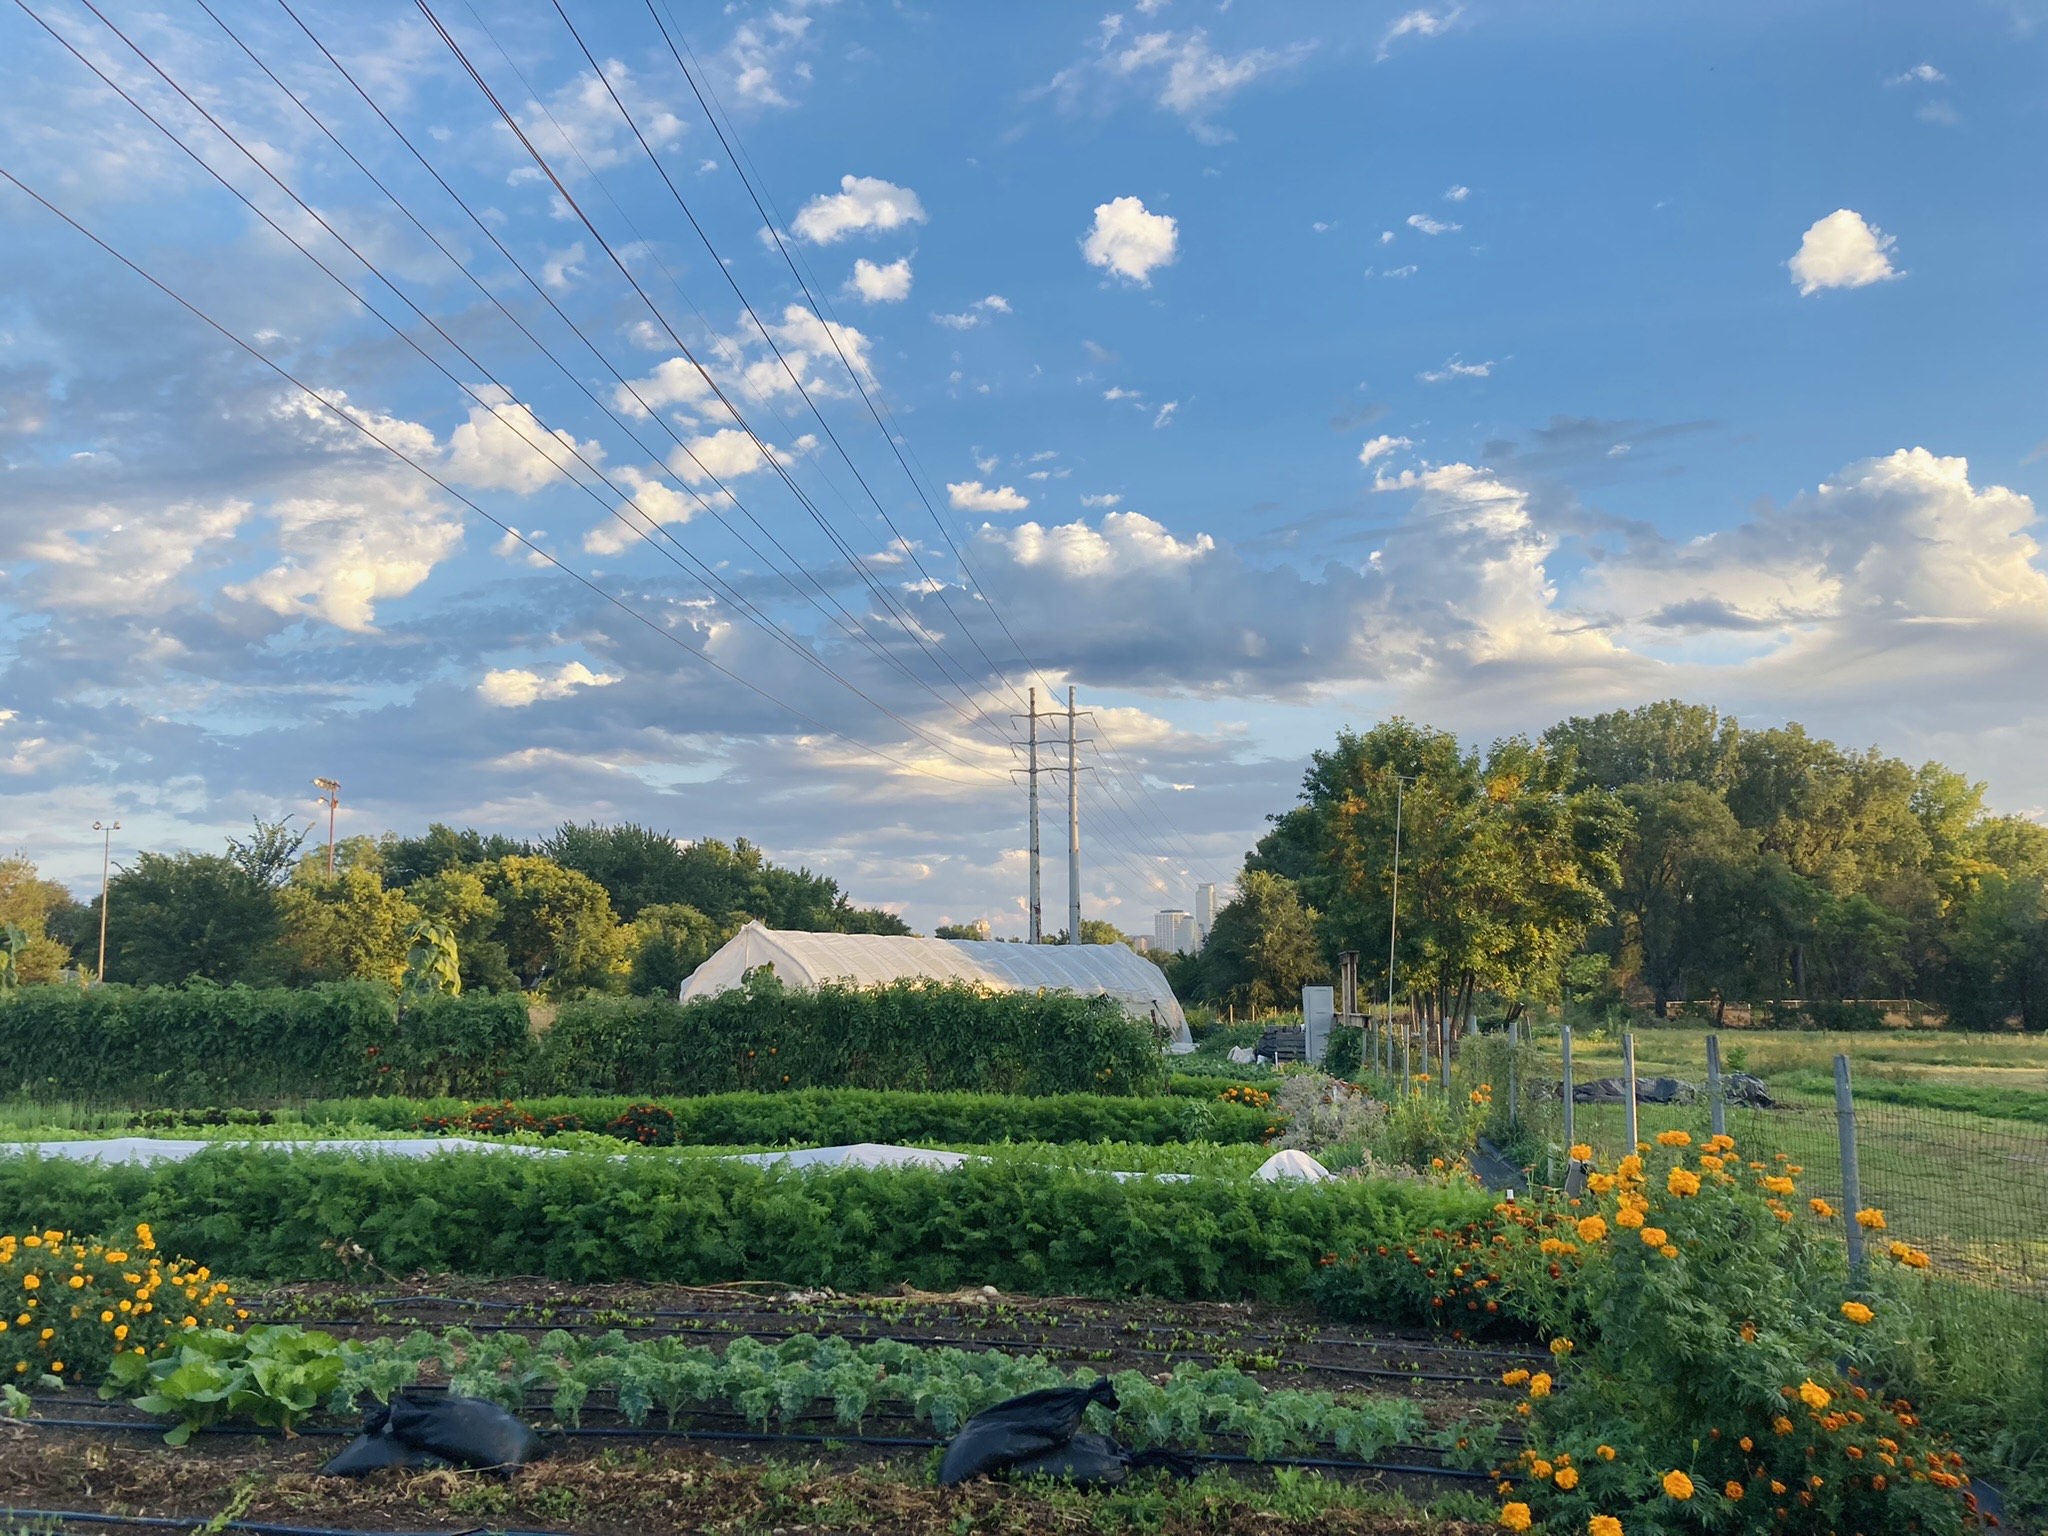 Photo of the California Street Farm in early summer, Header photo by Cory Eull. Used with permission.